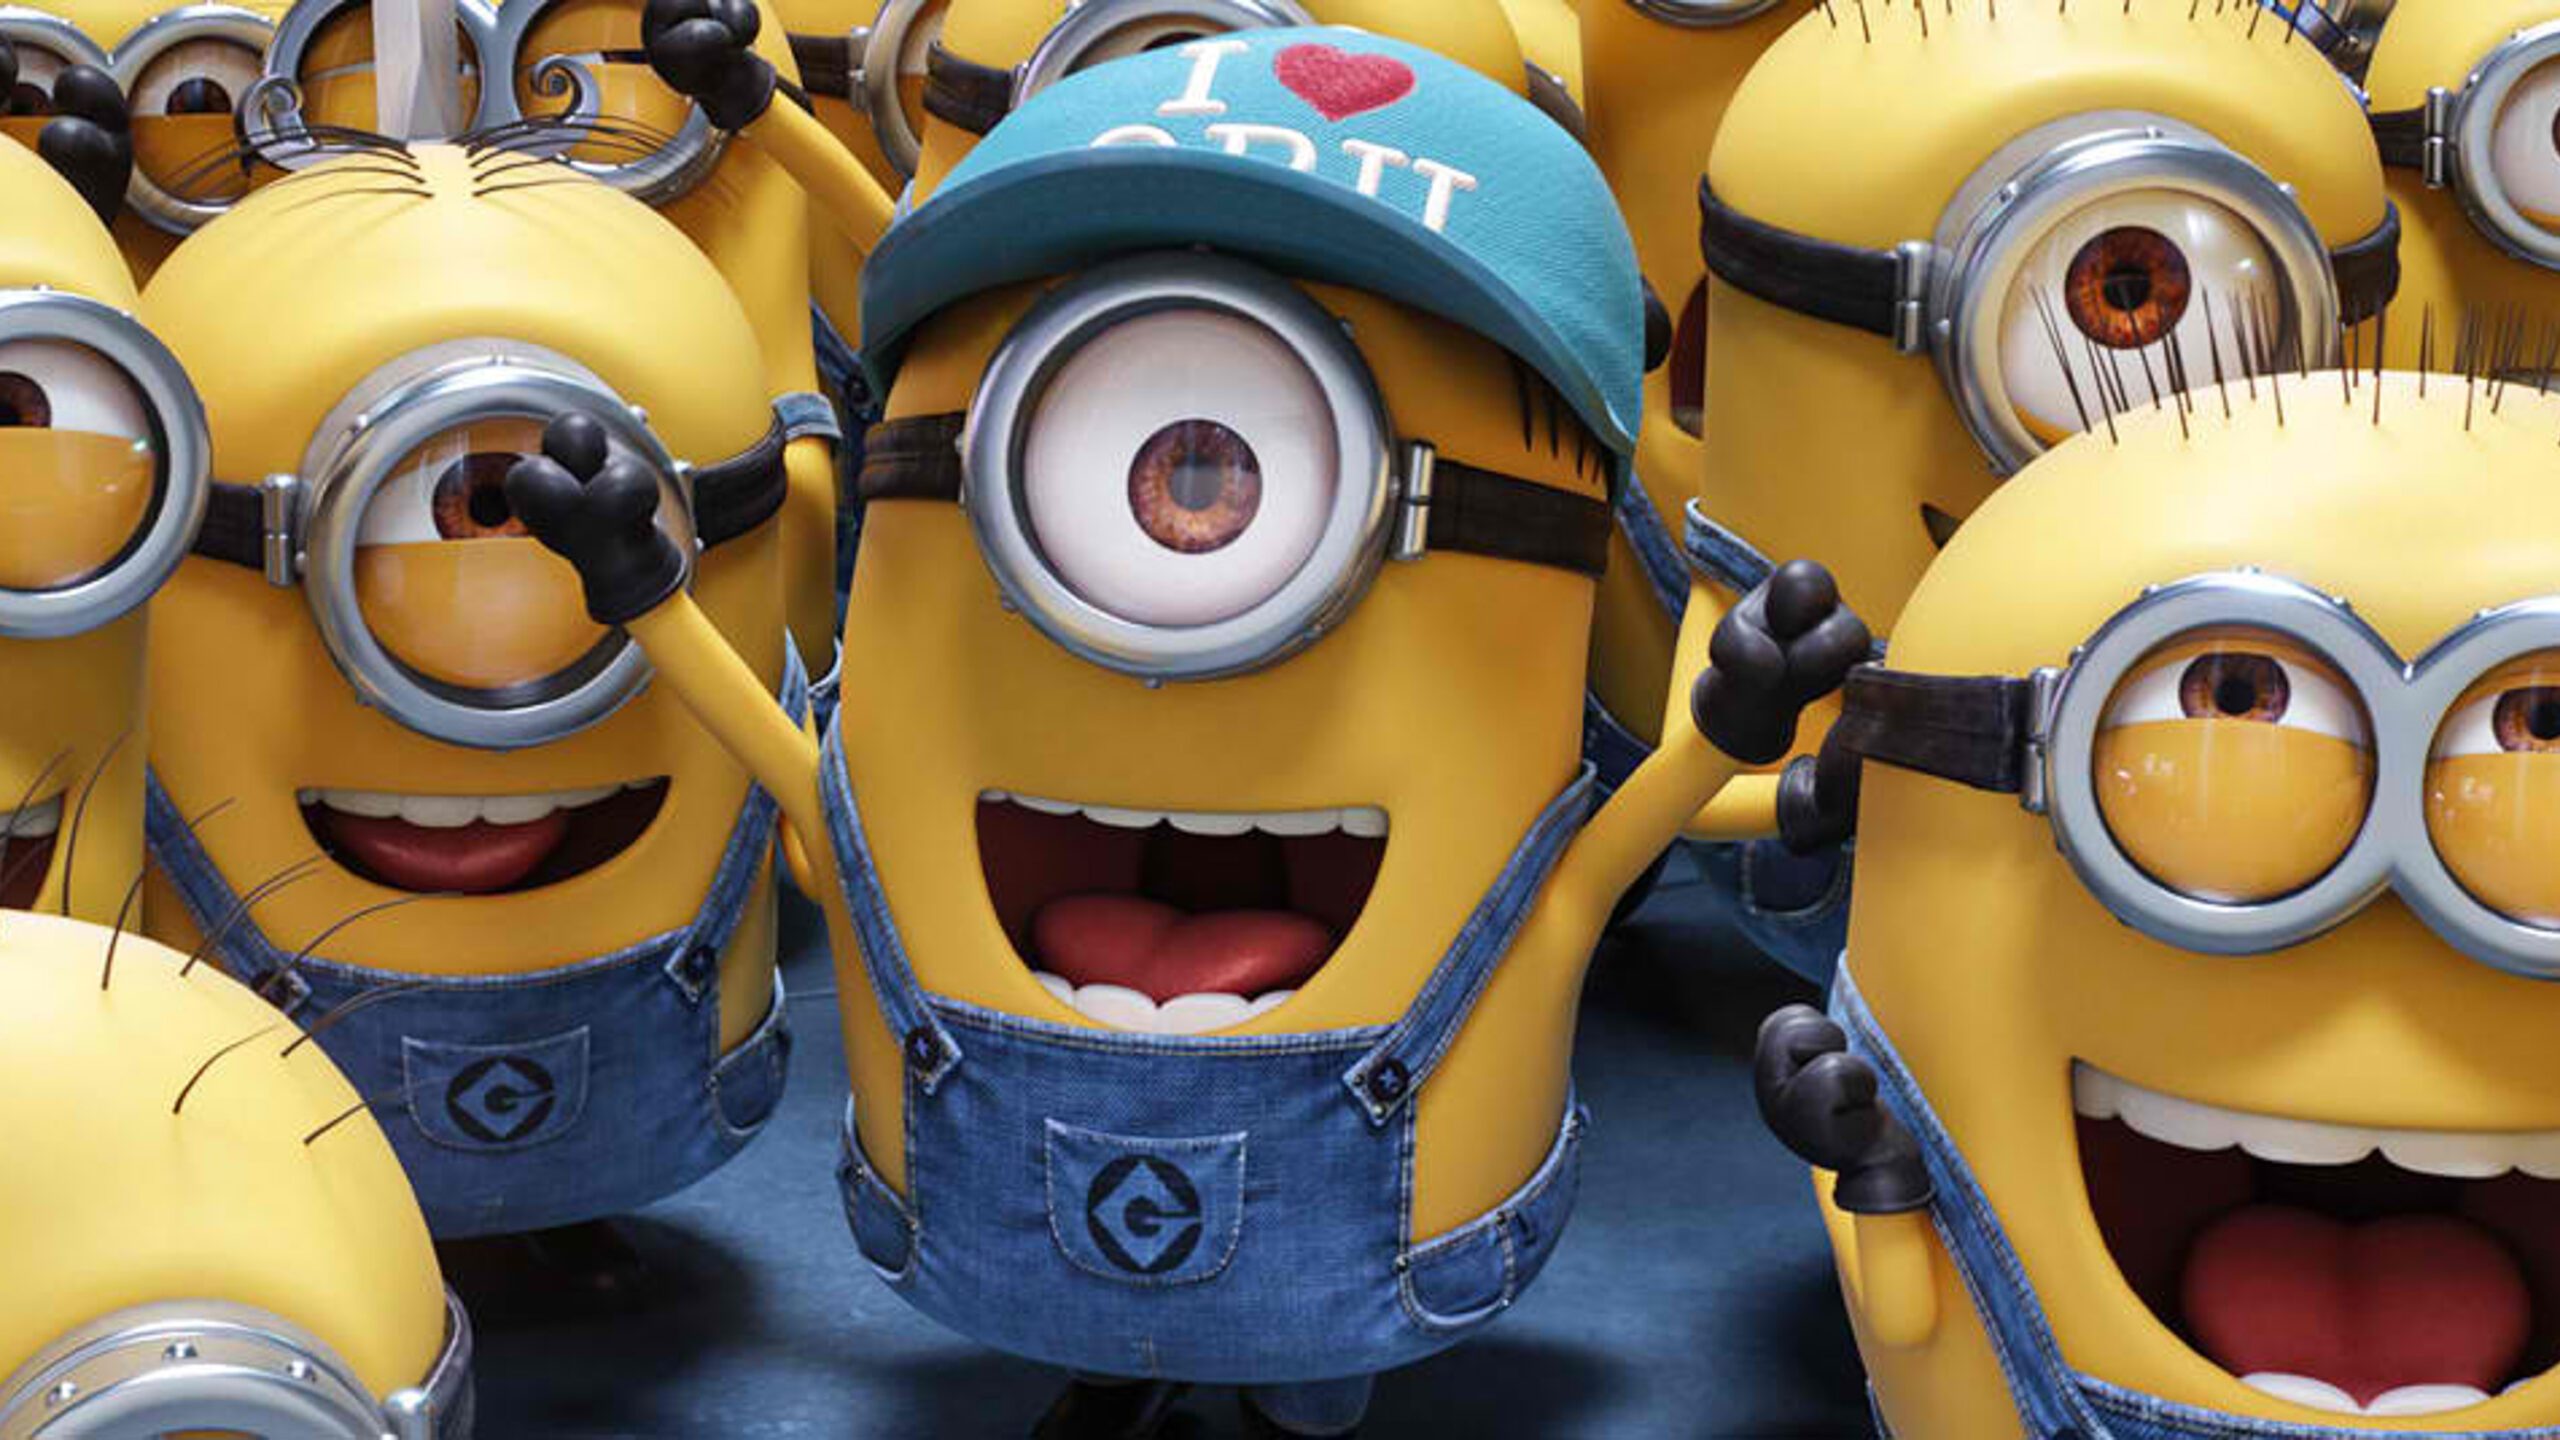 ‘Despicable Me 3’ review: All out of ideas